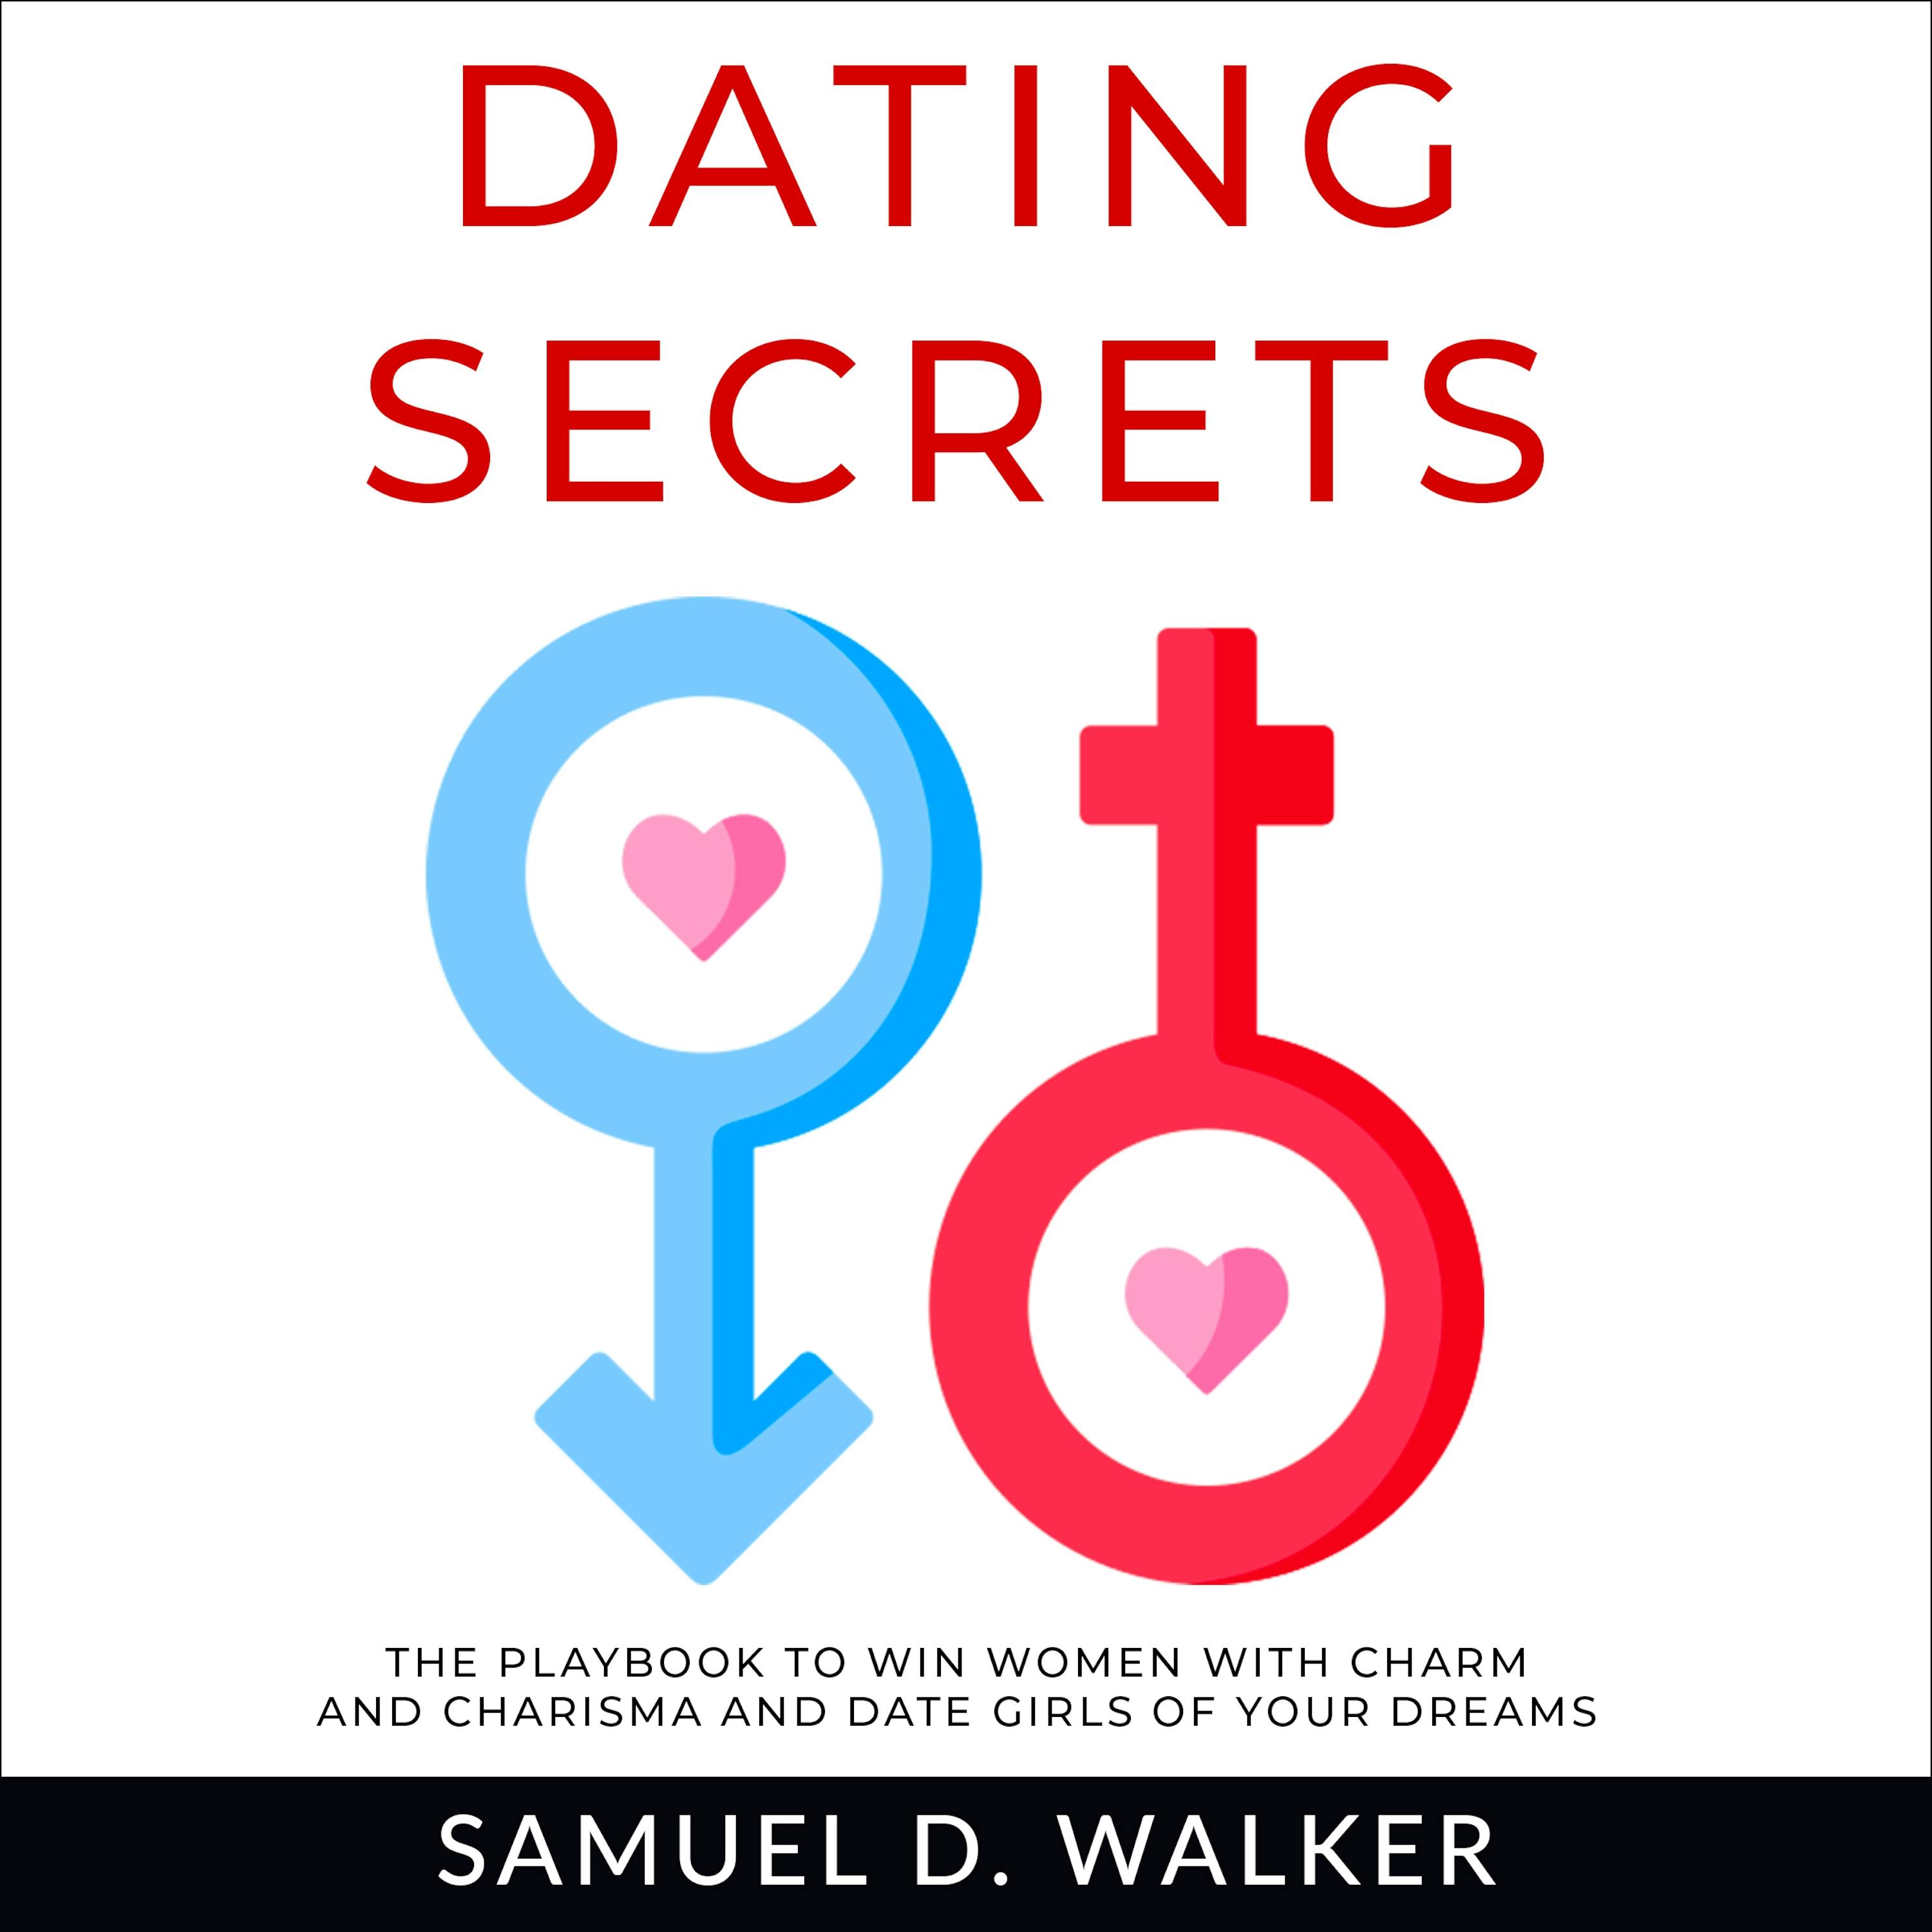 Dating Secrets: The playbook to win women with charm and charisma and date girls of your dreams - Samuel D. Walker